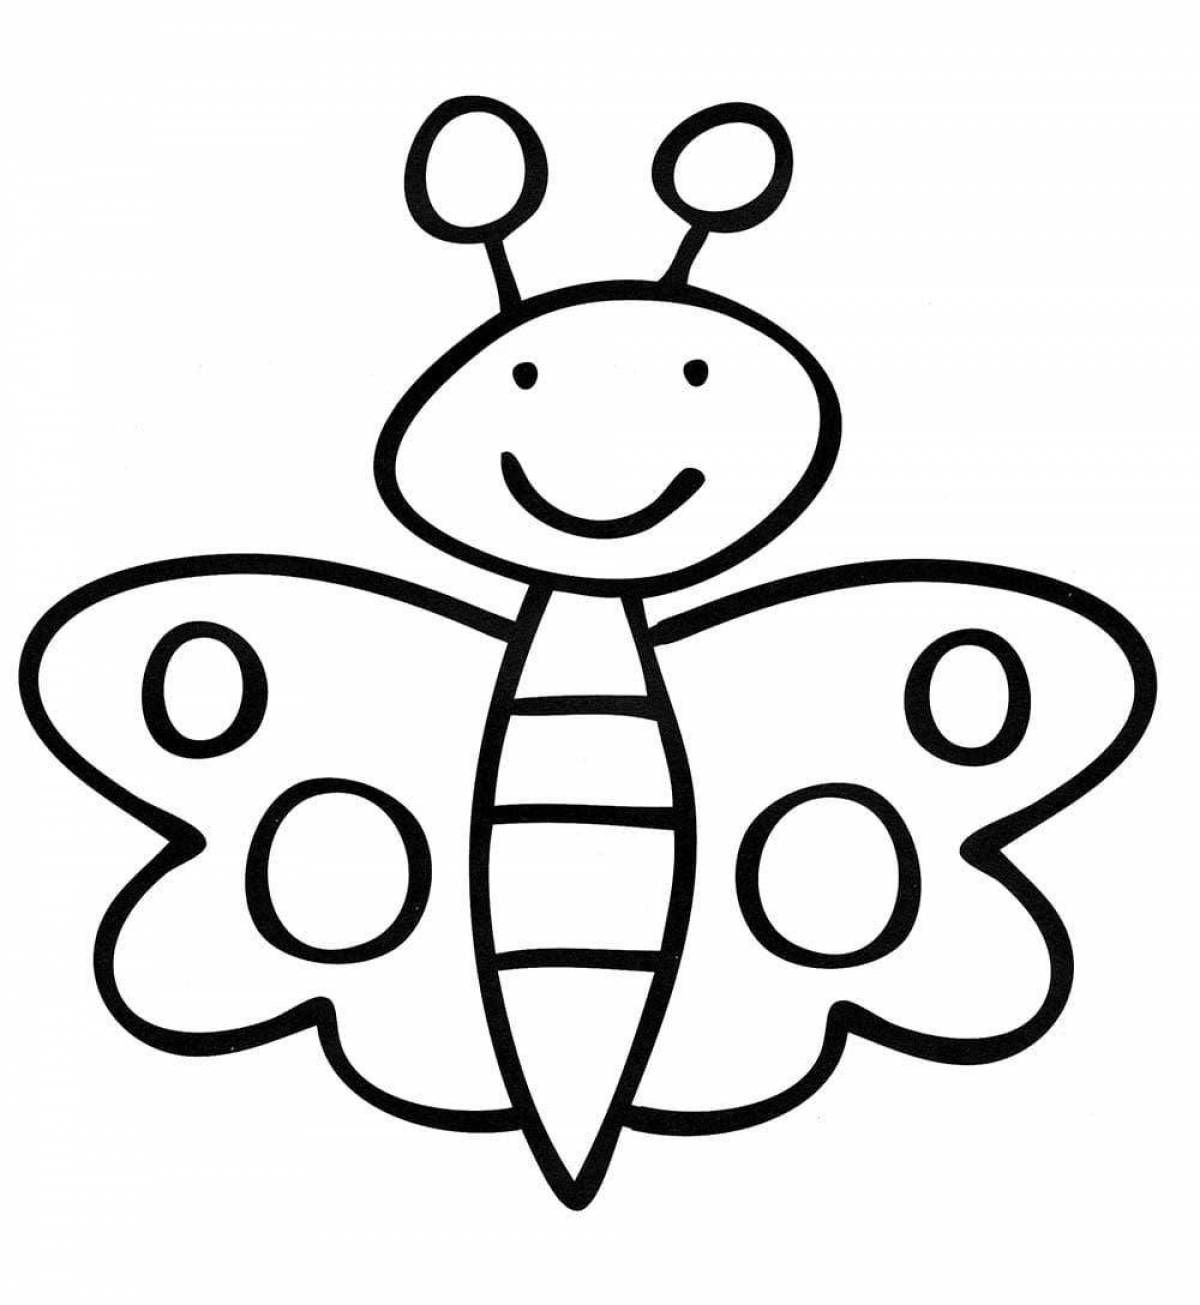 Coloring pages for children from 3 years old